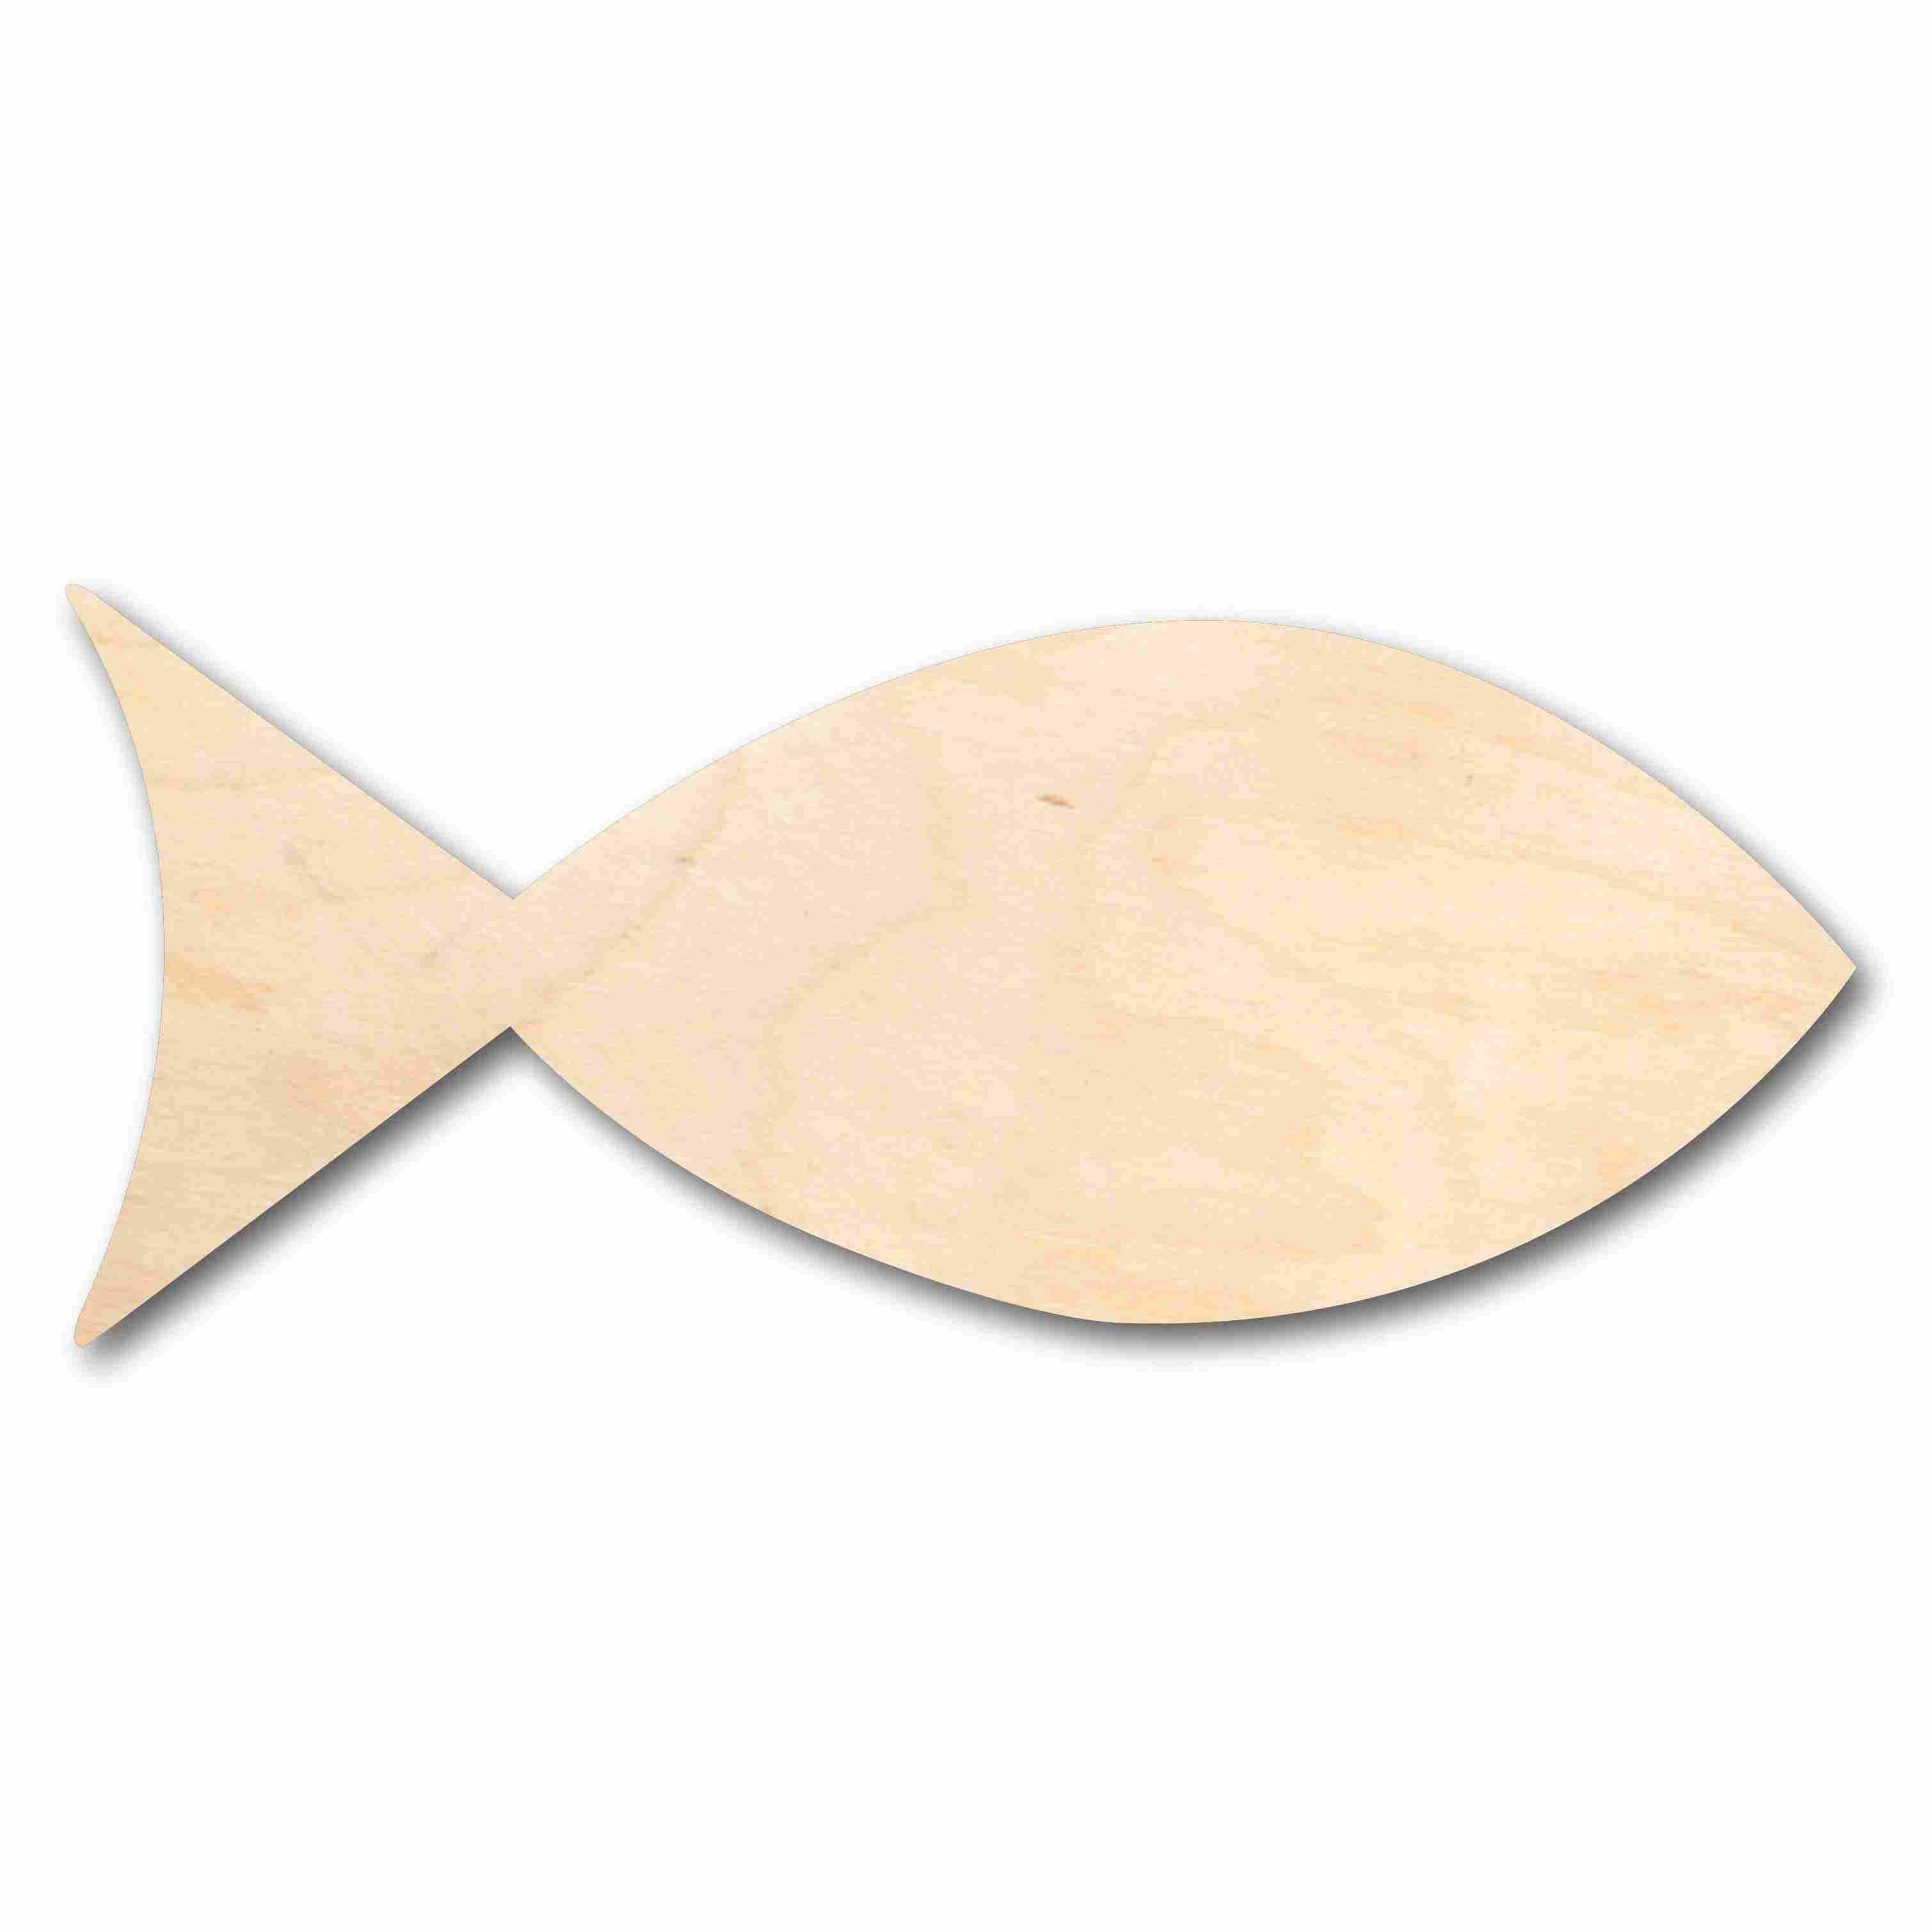 Unfinished Wood Fish Shape Silhouette - Craft- up to 24